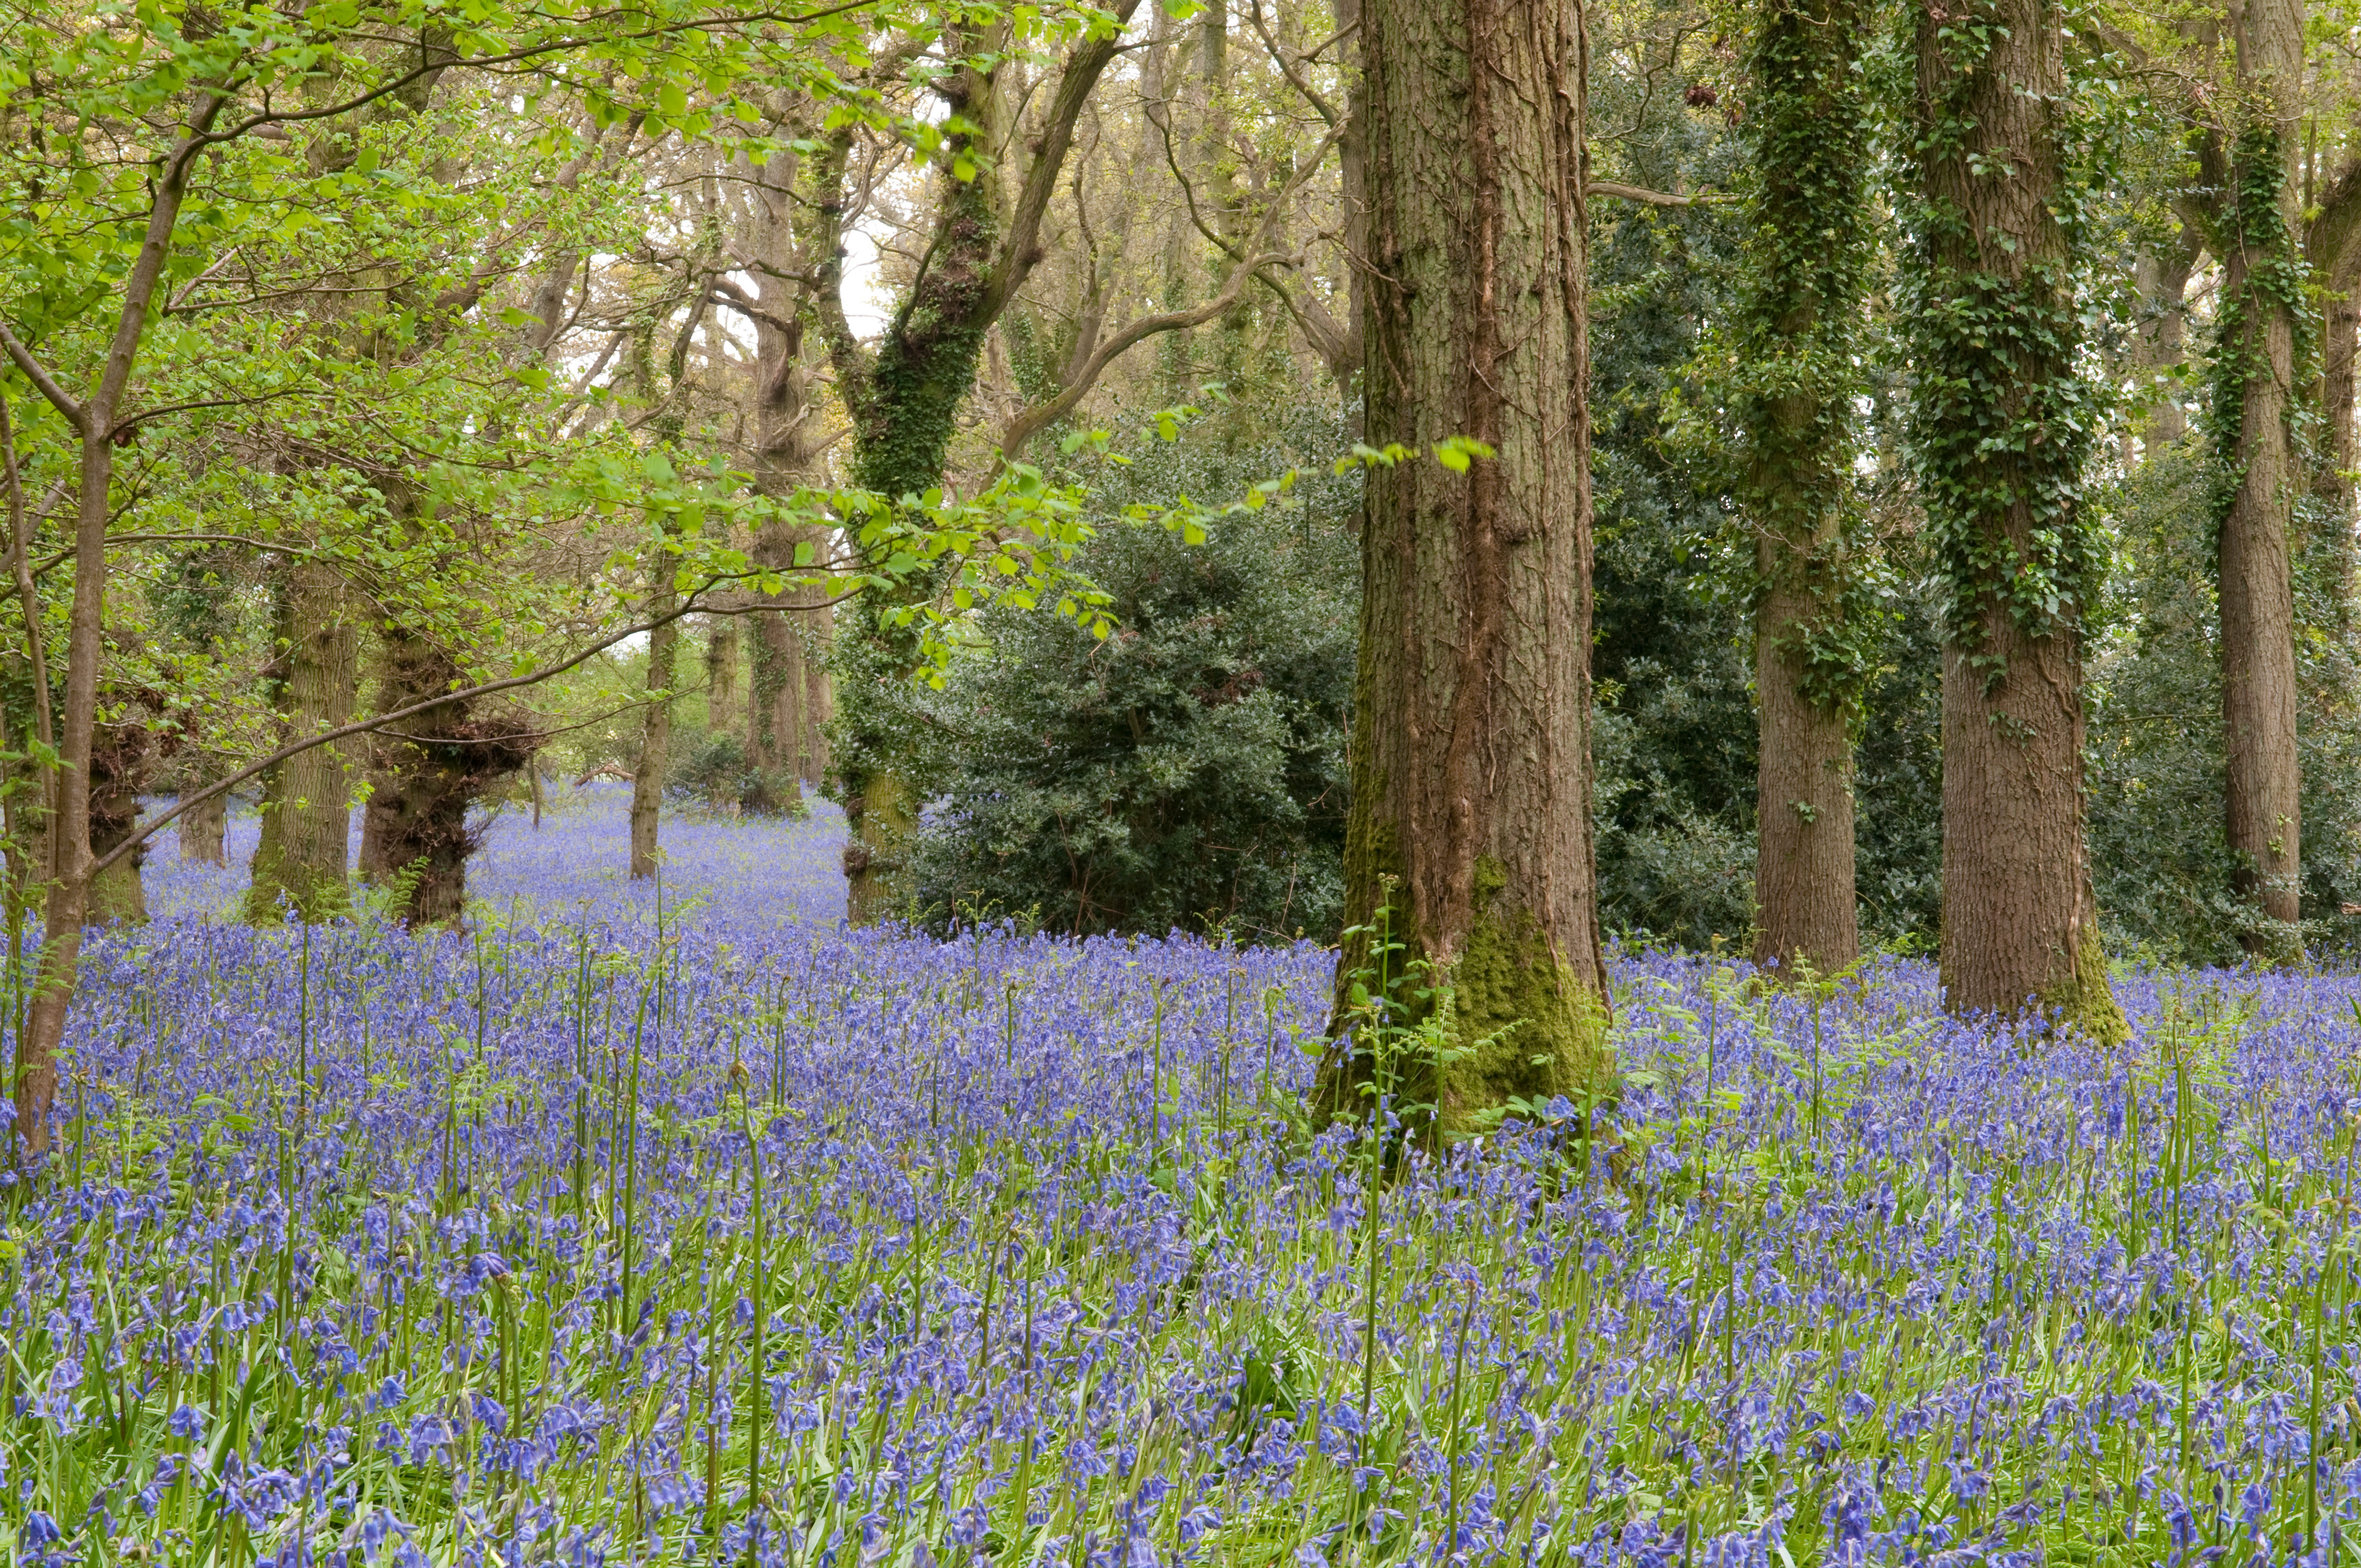 Pamphill Bluebell Wood is located in East Dorset